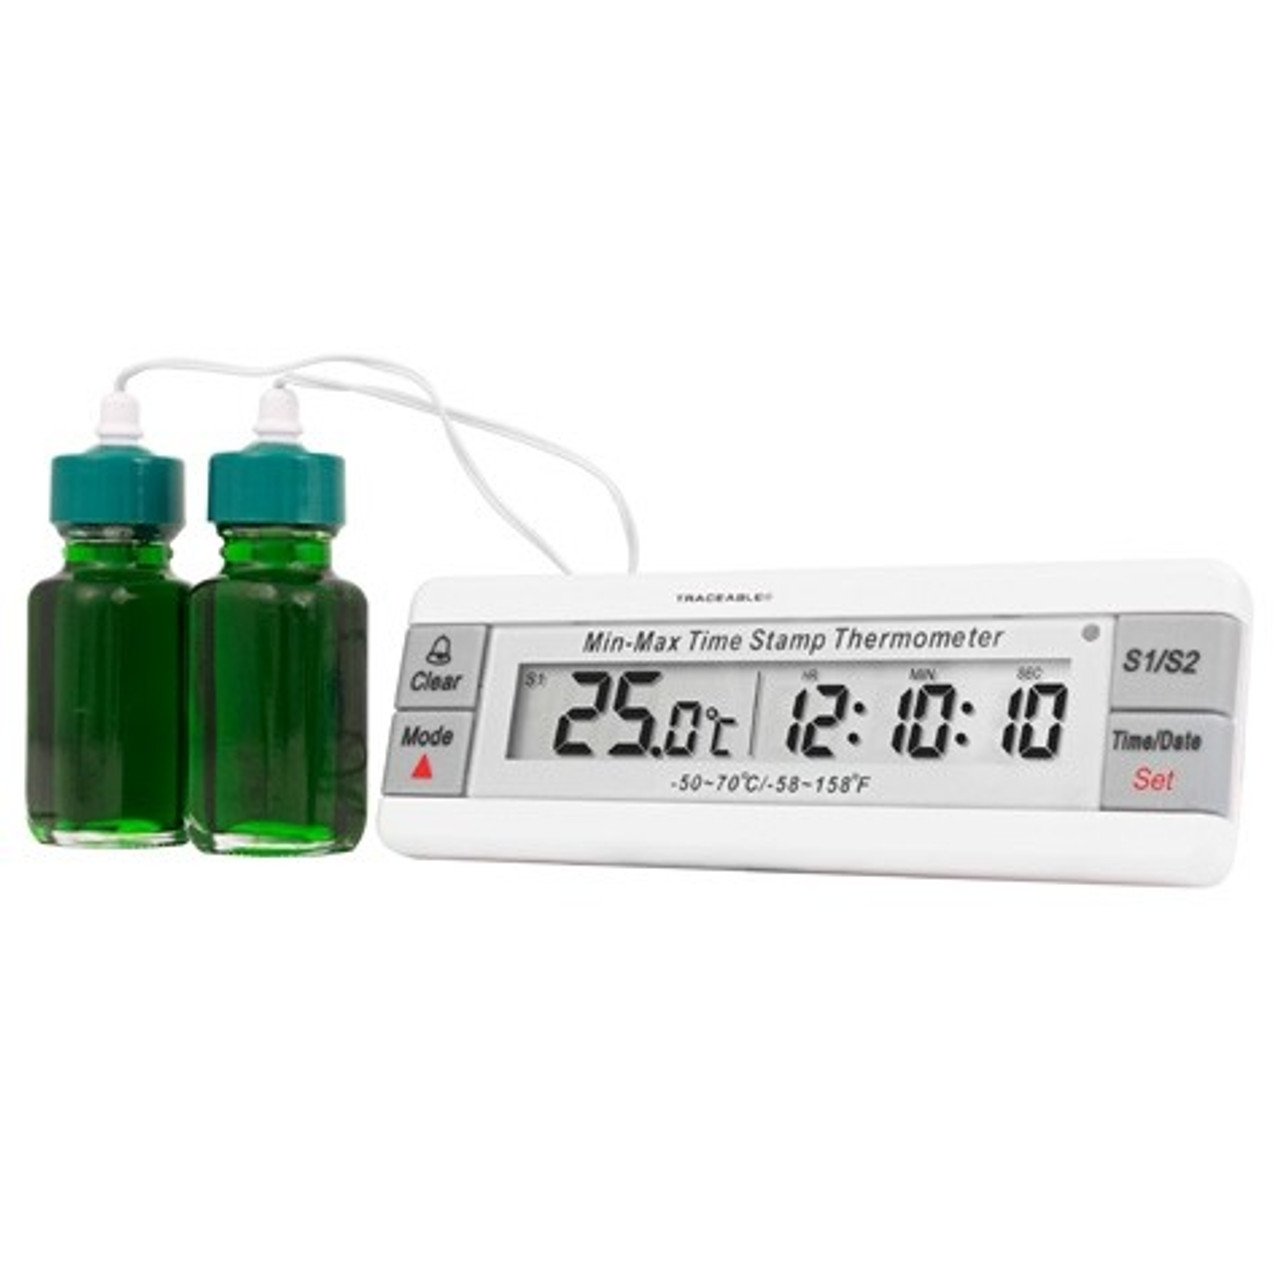 Jumbo-Display Traceable Dial Thermometer